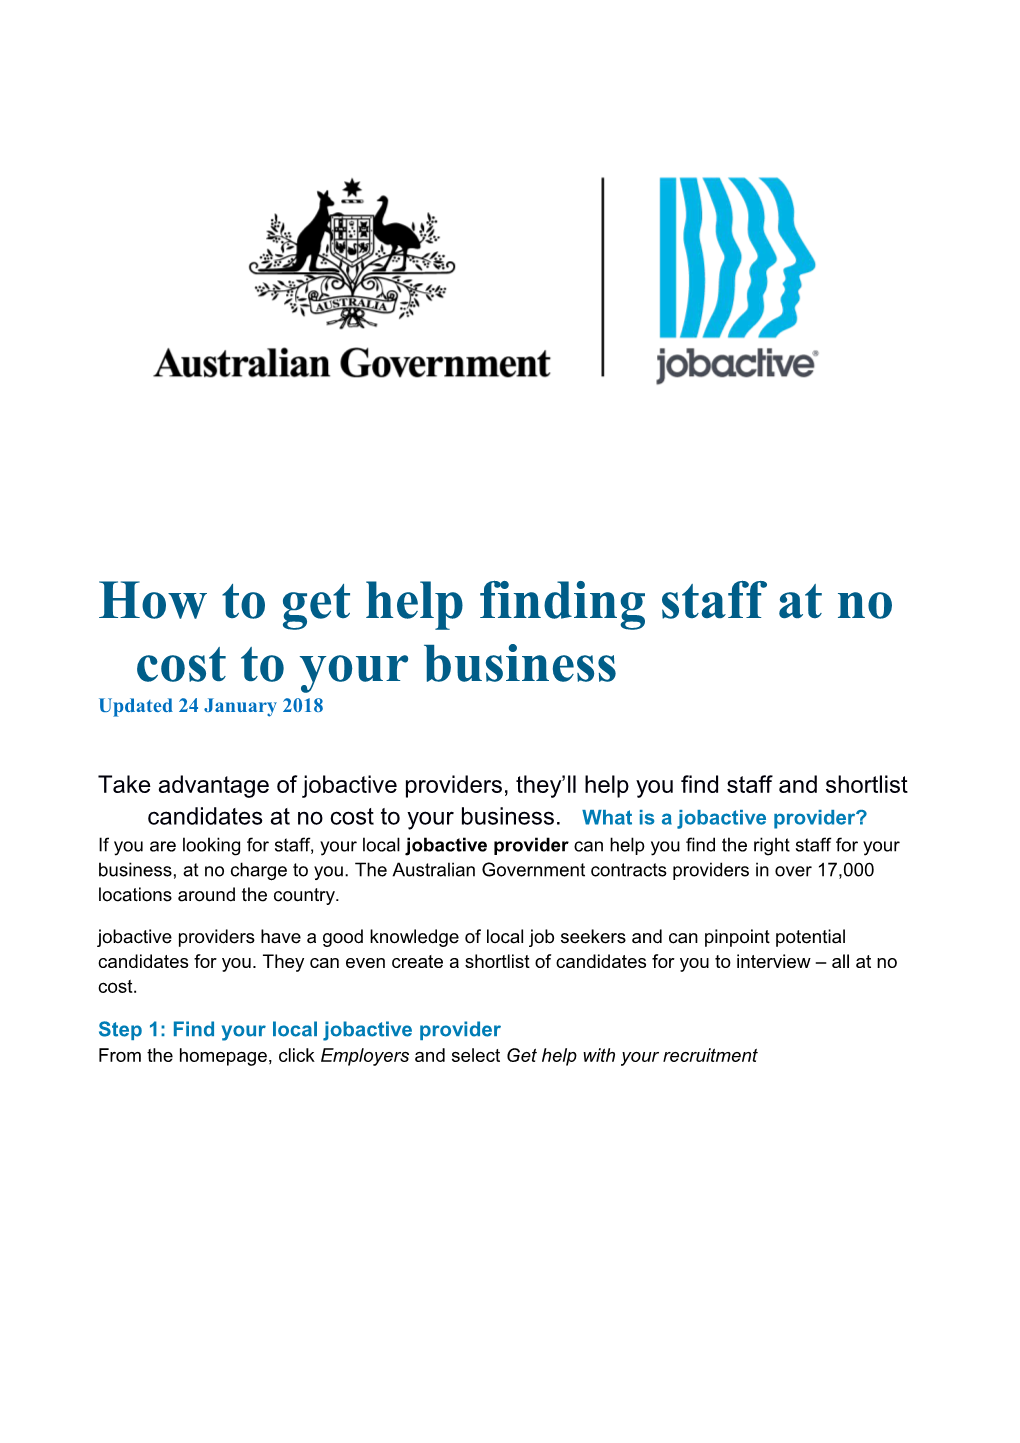 How to Get Help Finding Staff at No Cost to Your Business